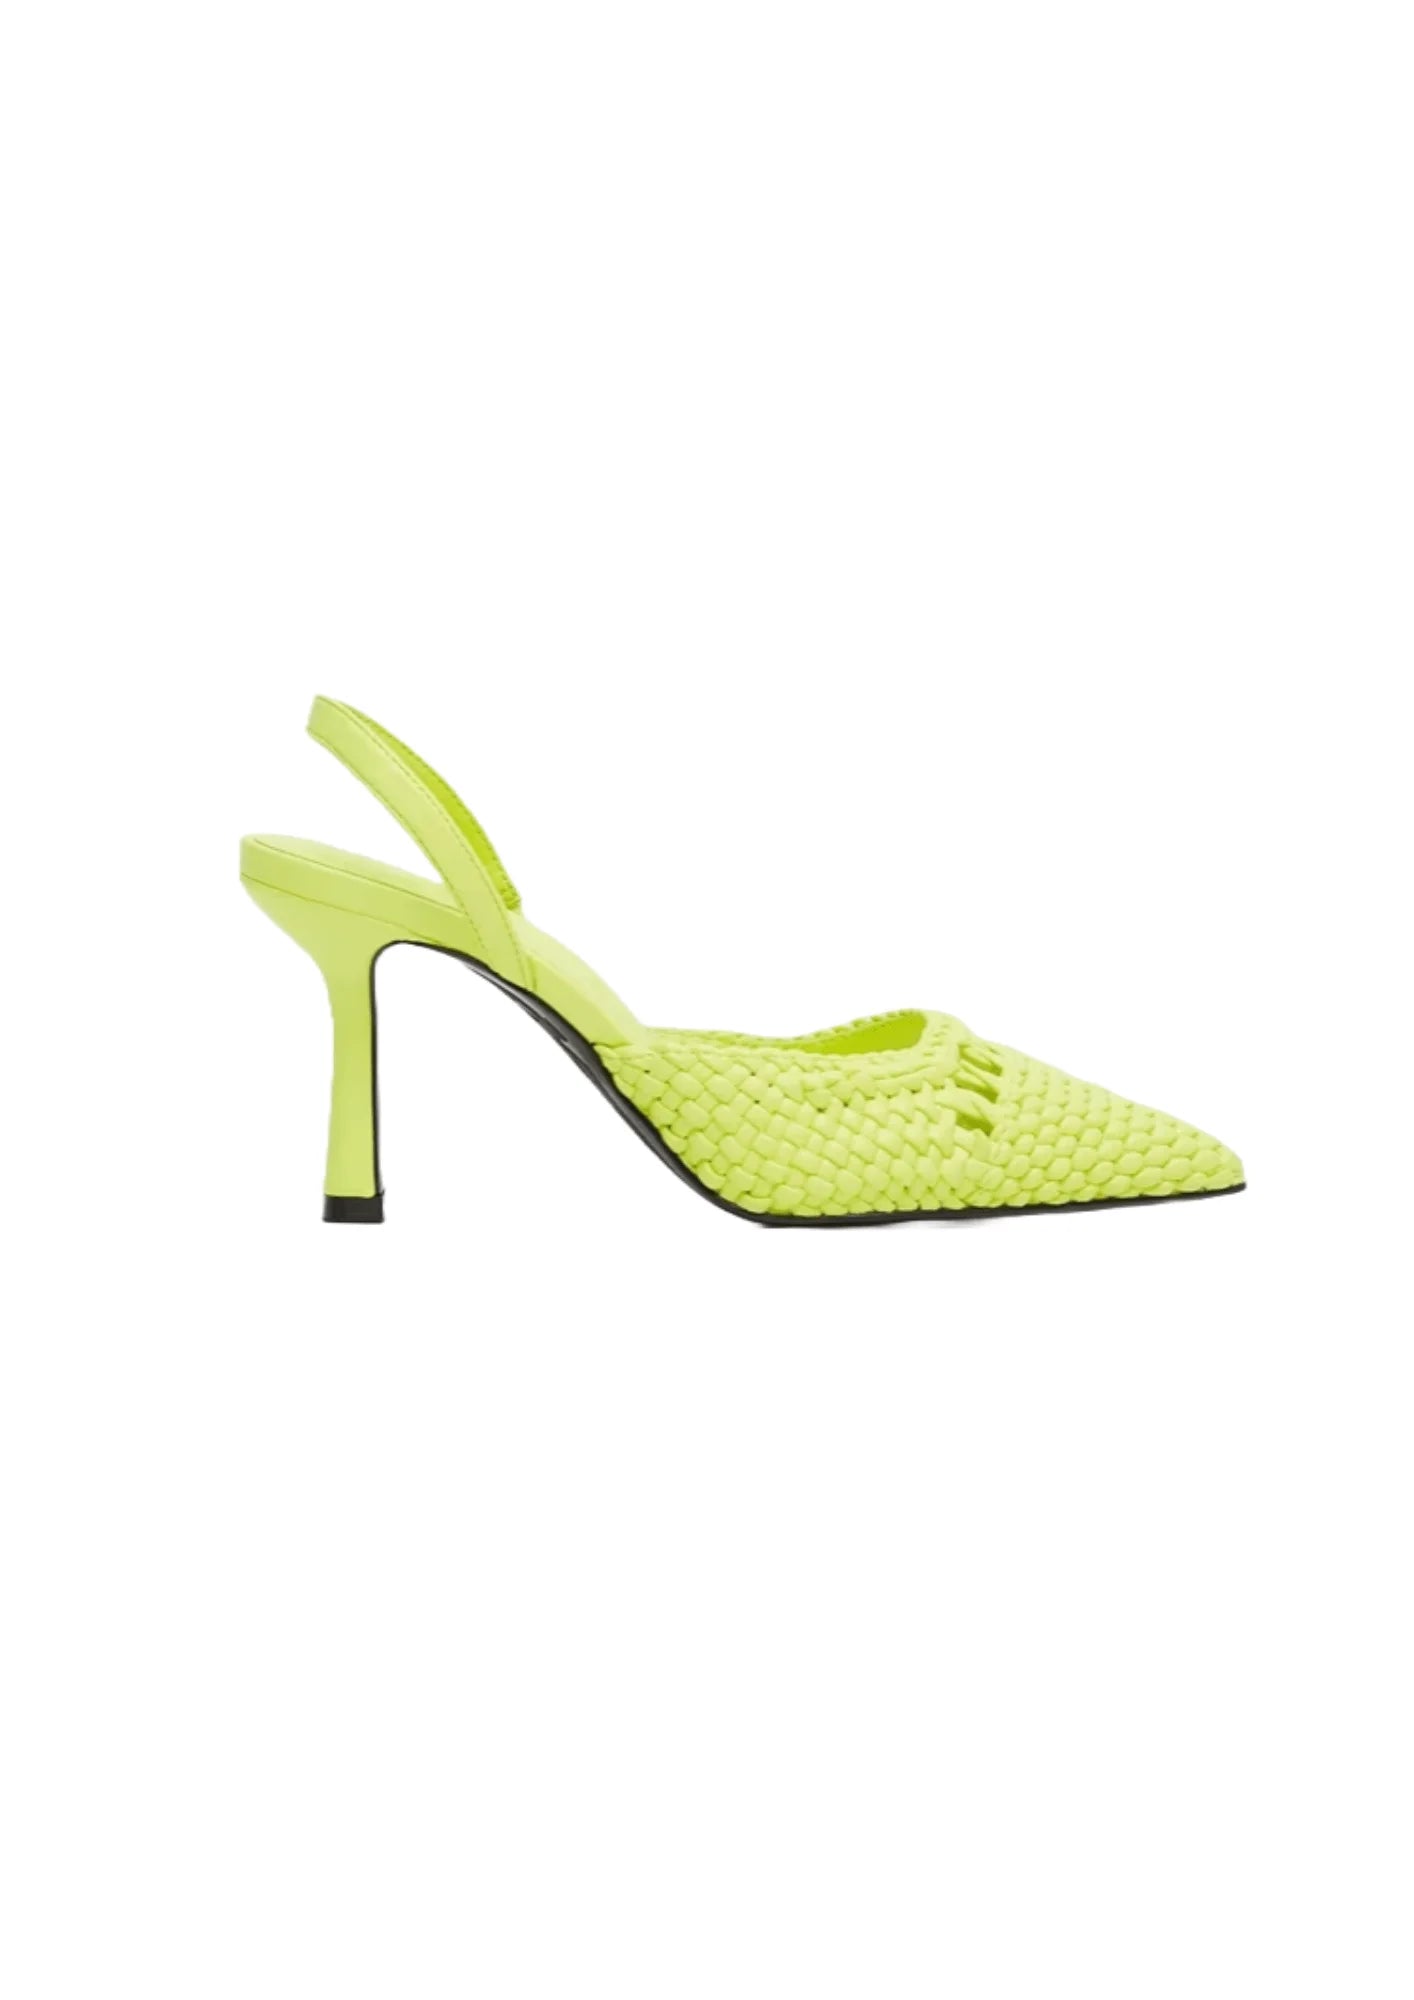 LIME BRAIDED HEEL SHOES